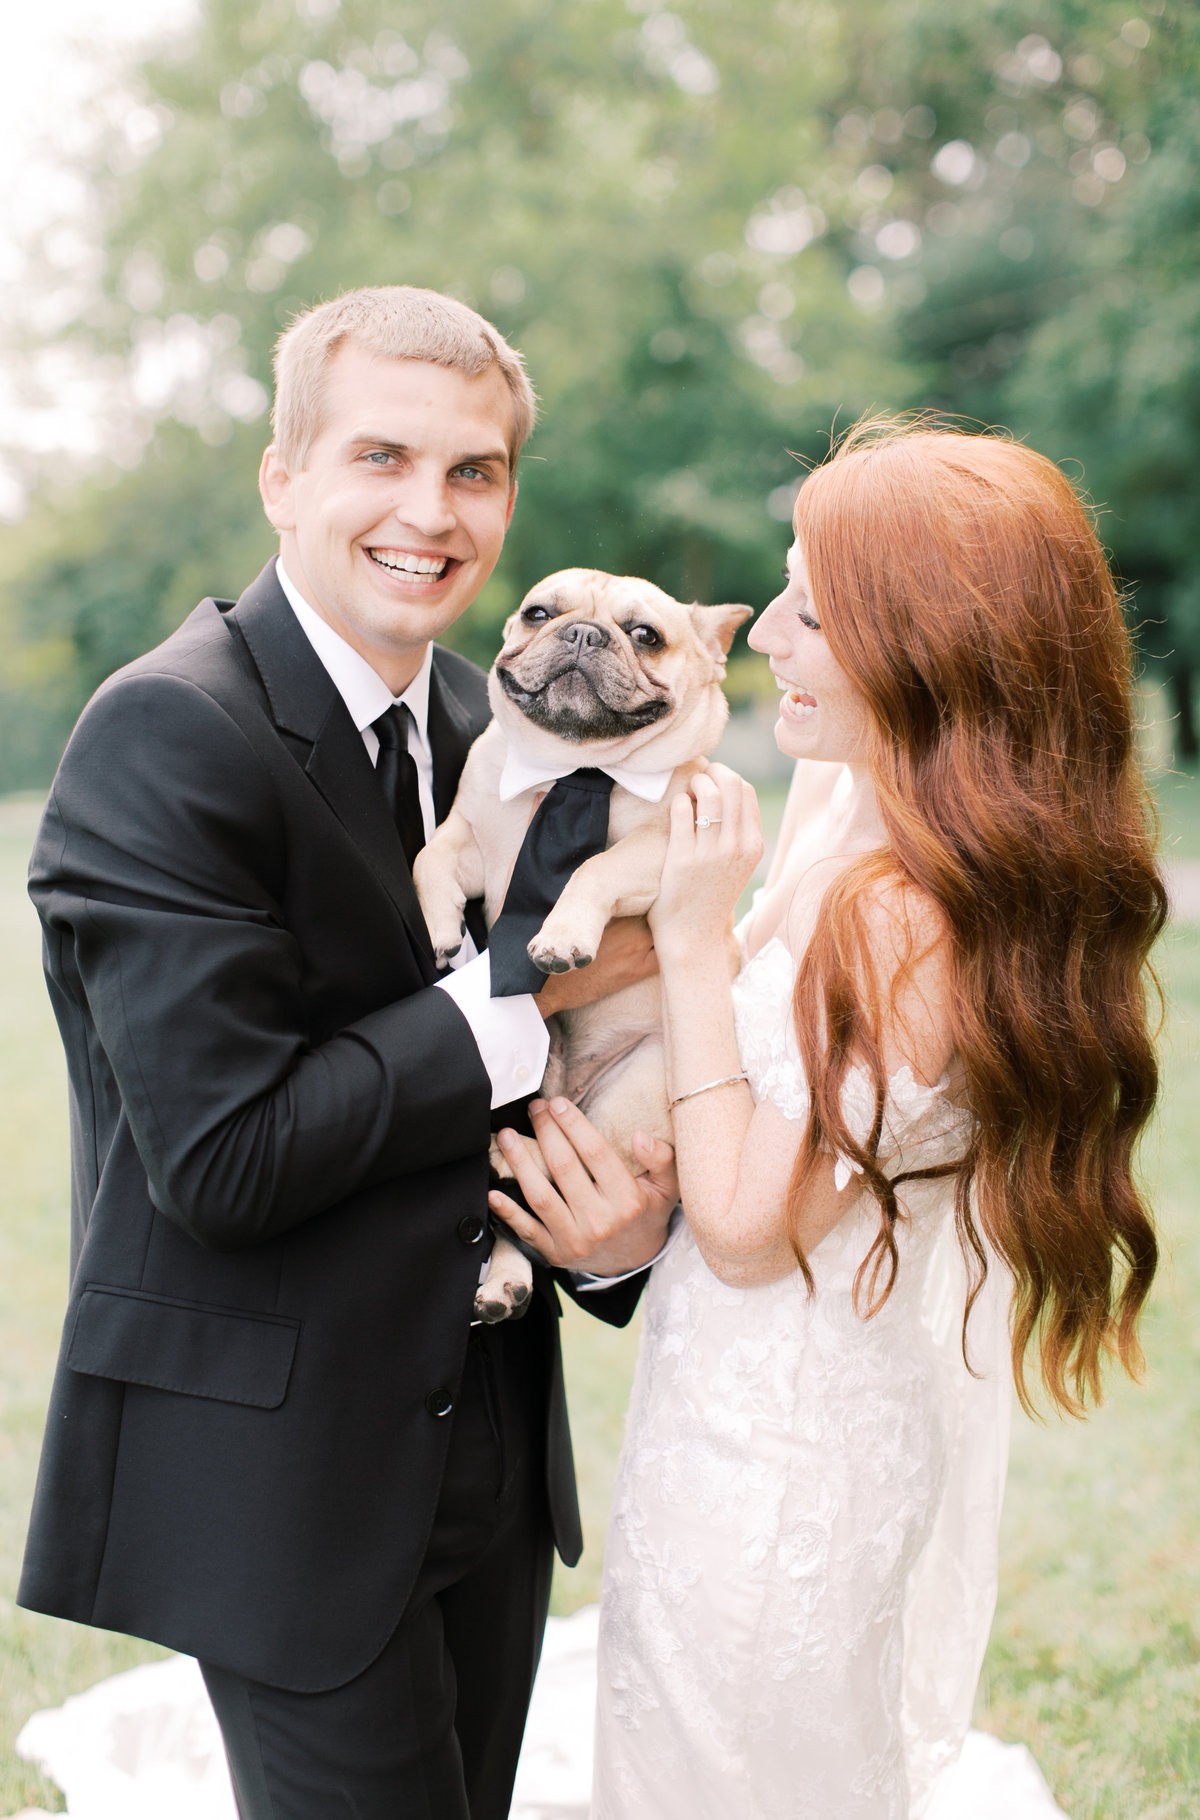 bride and groom holding pet pug dressed in wedding attire